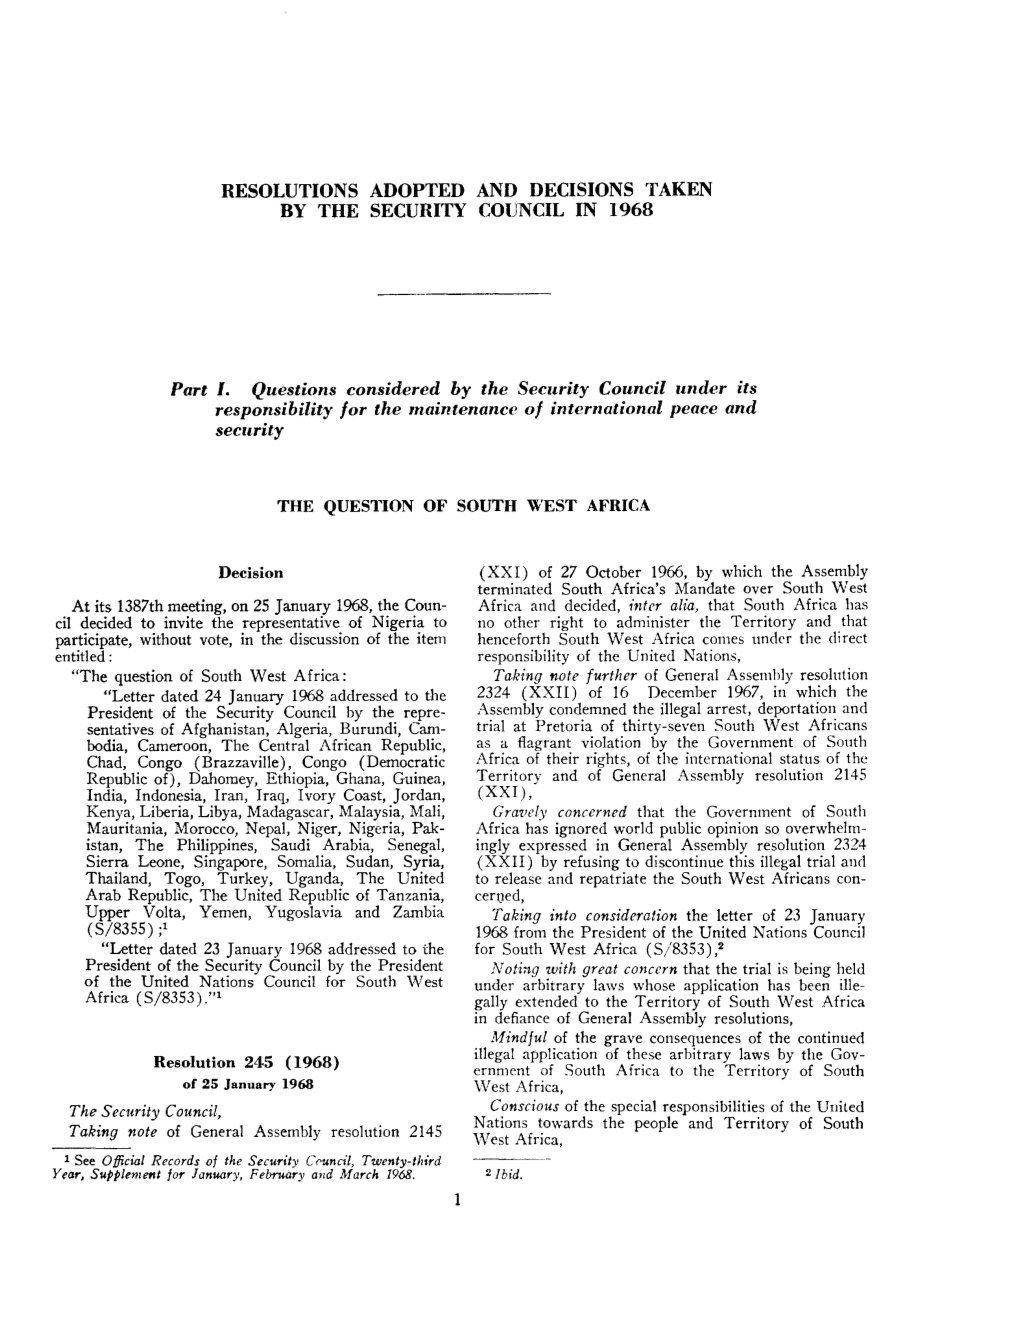 Resolutions Adopted and Decisions Taken by the Security Council in 1968